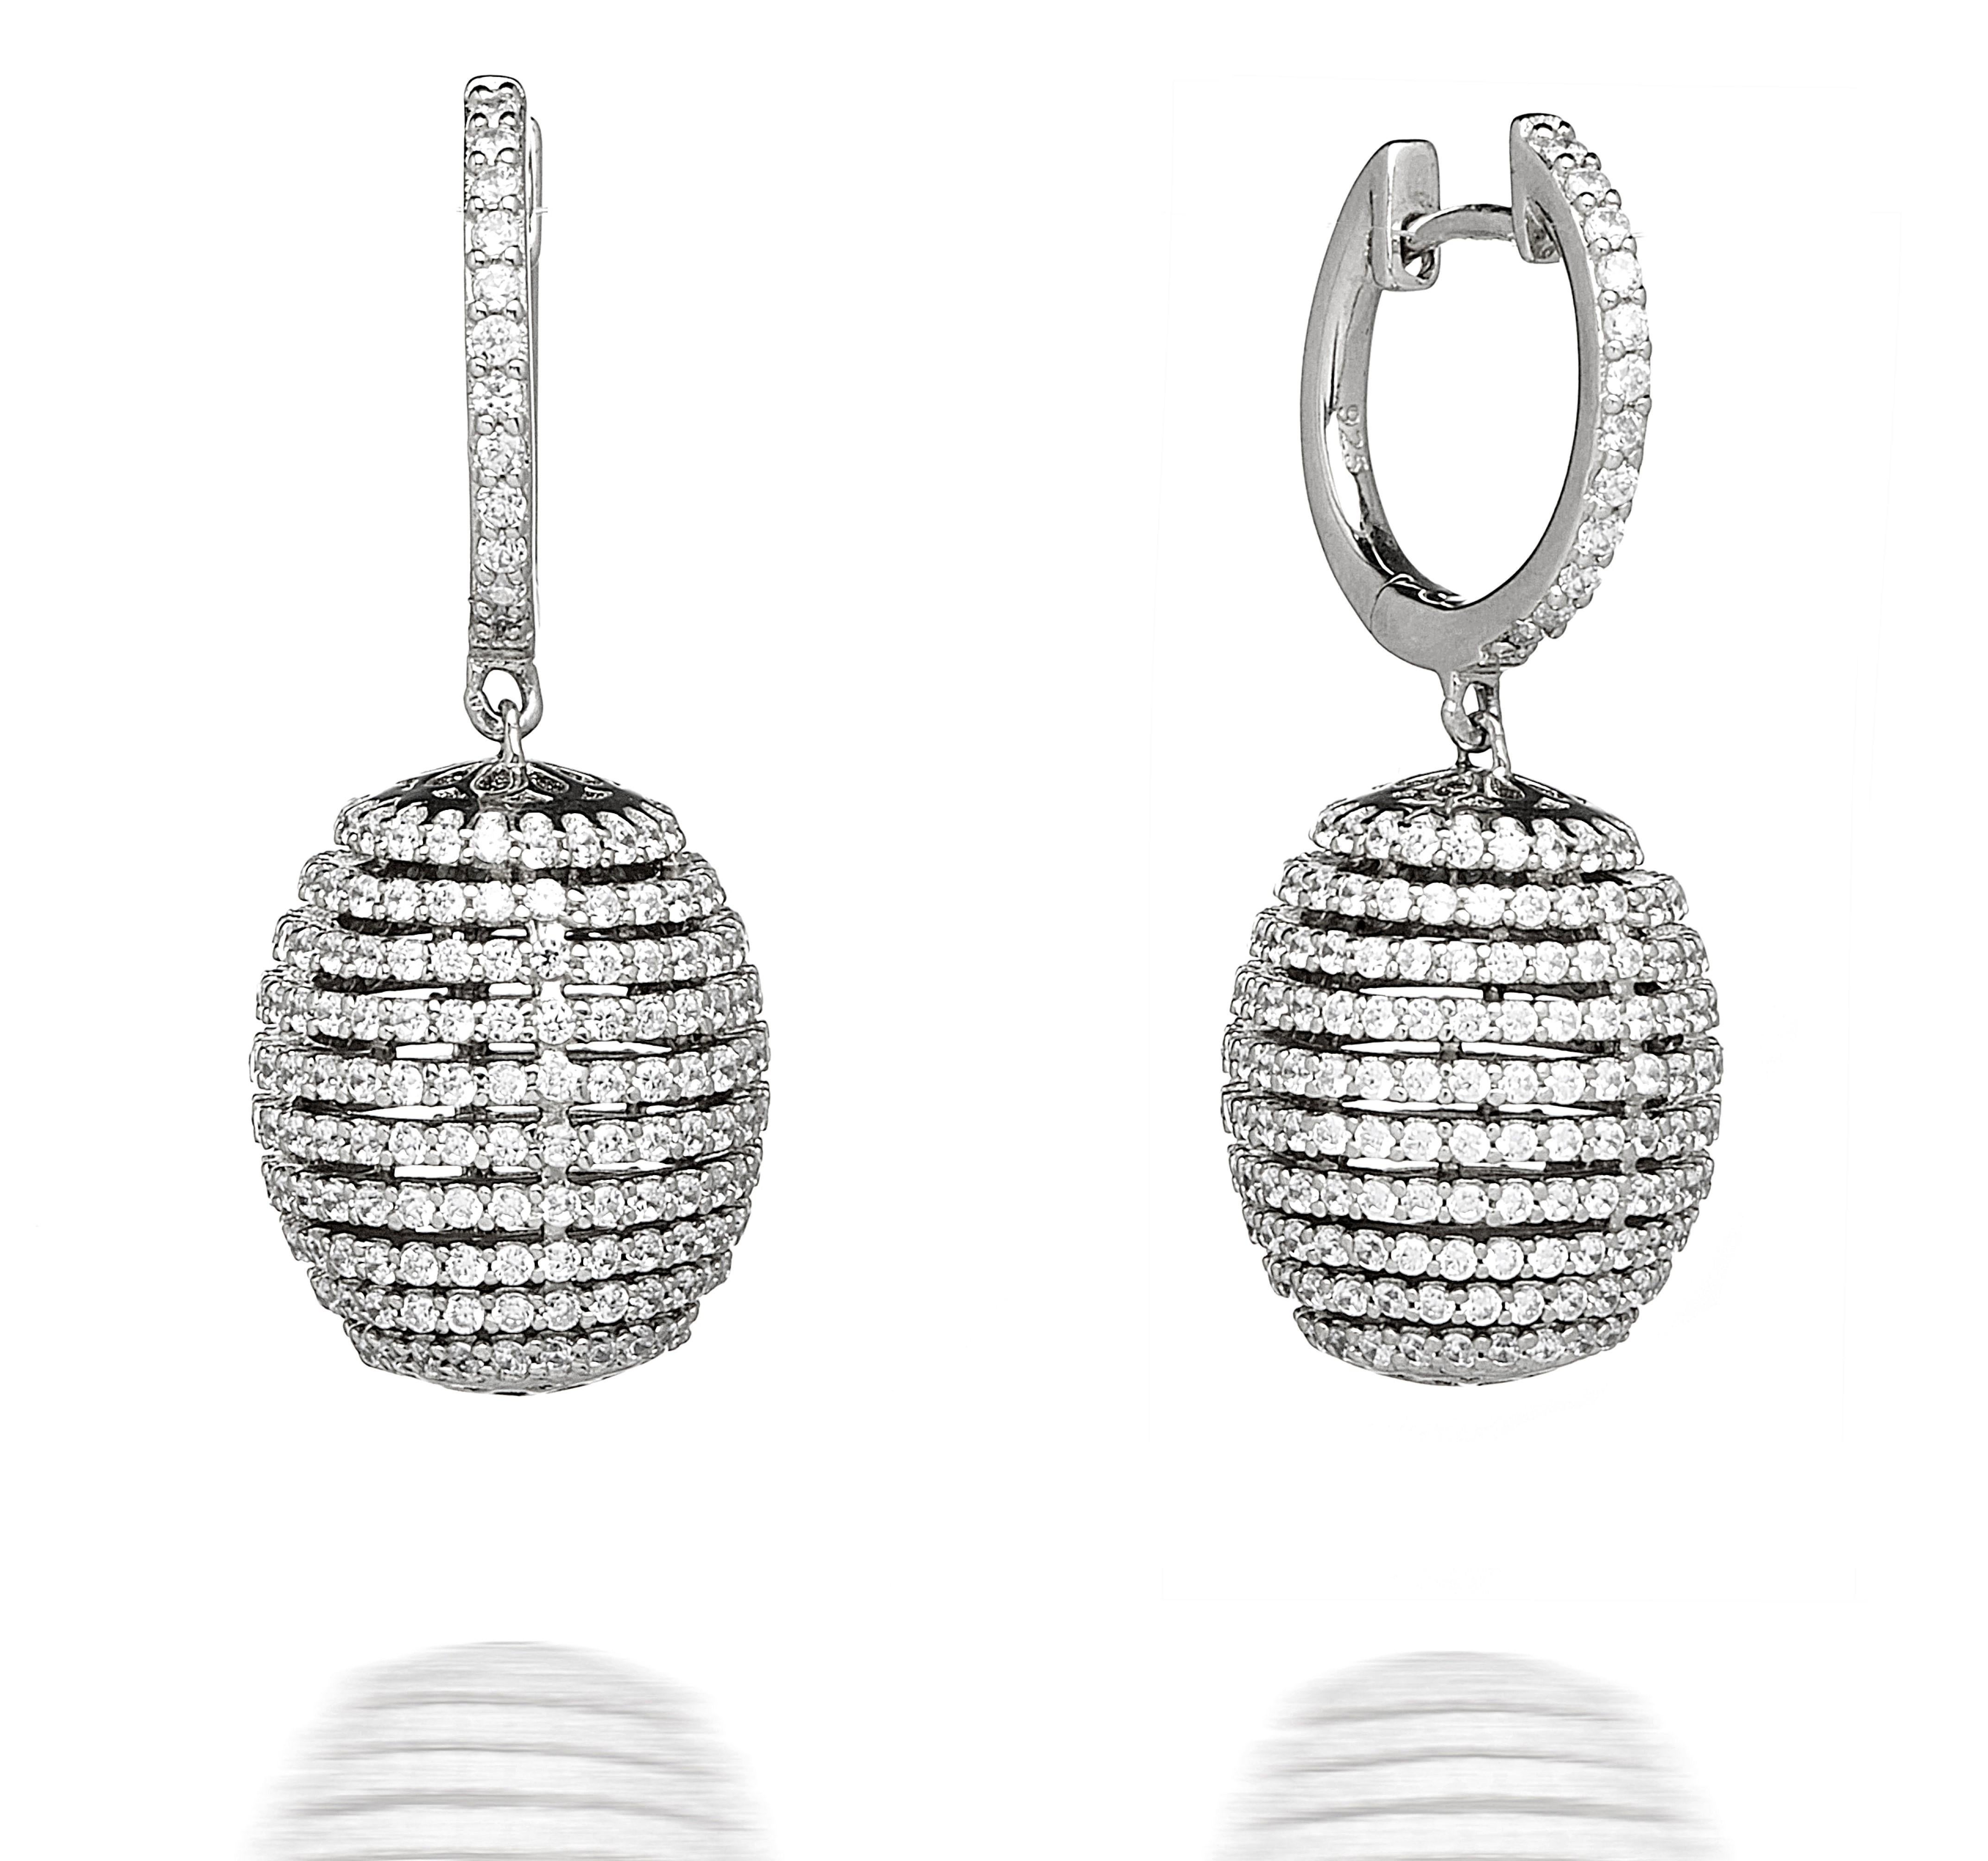 A stunningly unique composition, these white beehive style earrings feature intricately designed cubic zirconia set in circular rows.

Finished with imprints of flowers to the top and underside of the drop. Handcrafted in 925 sterling silver with a